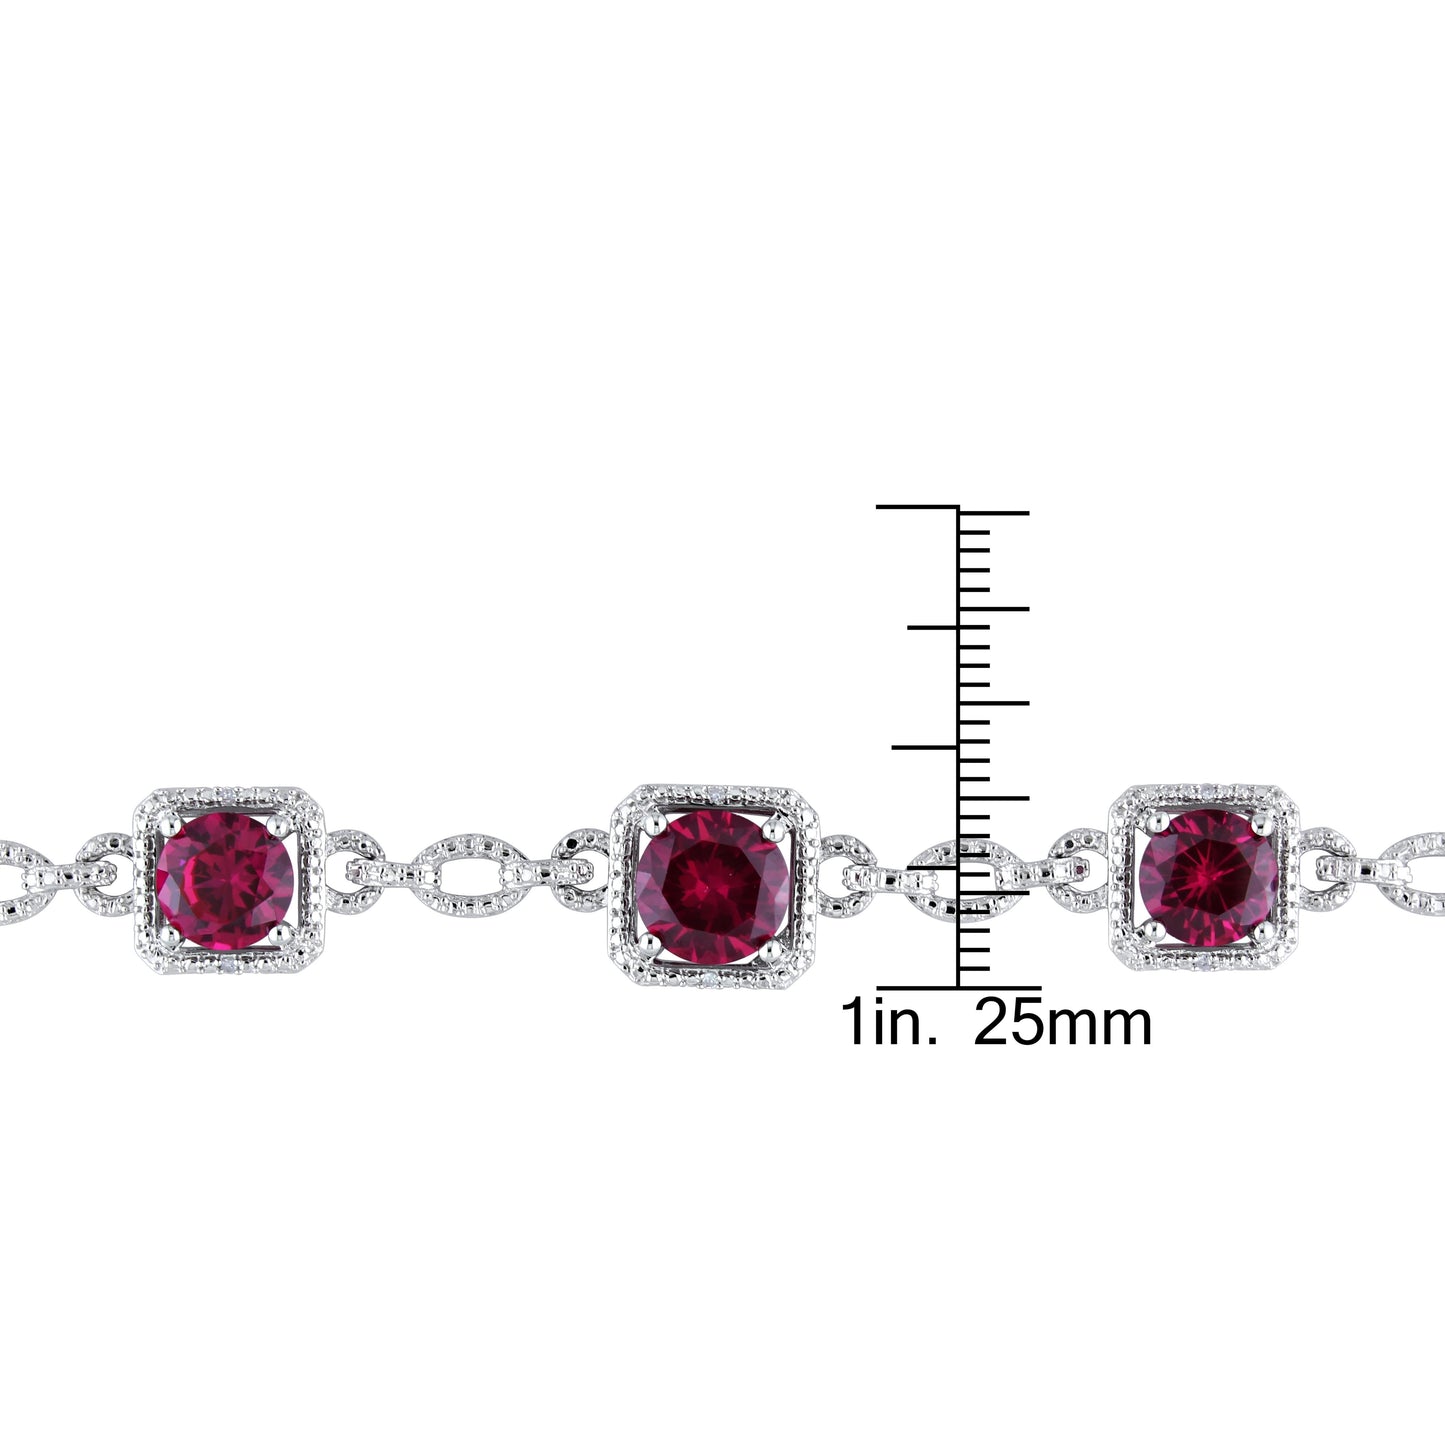 Ruby & Diamond Necklace in Sterling Silver